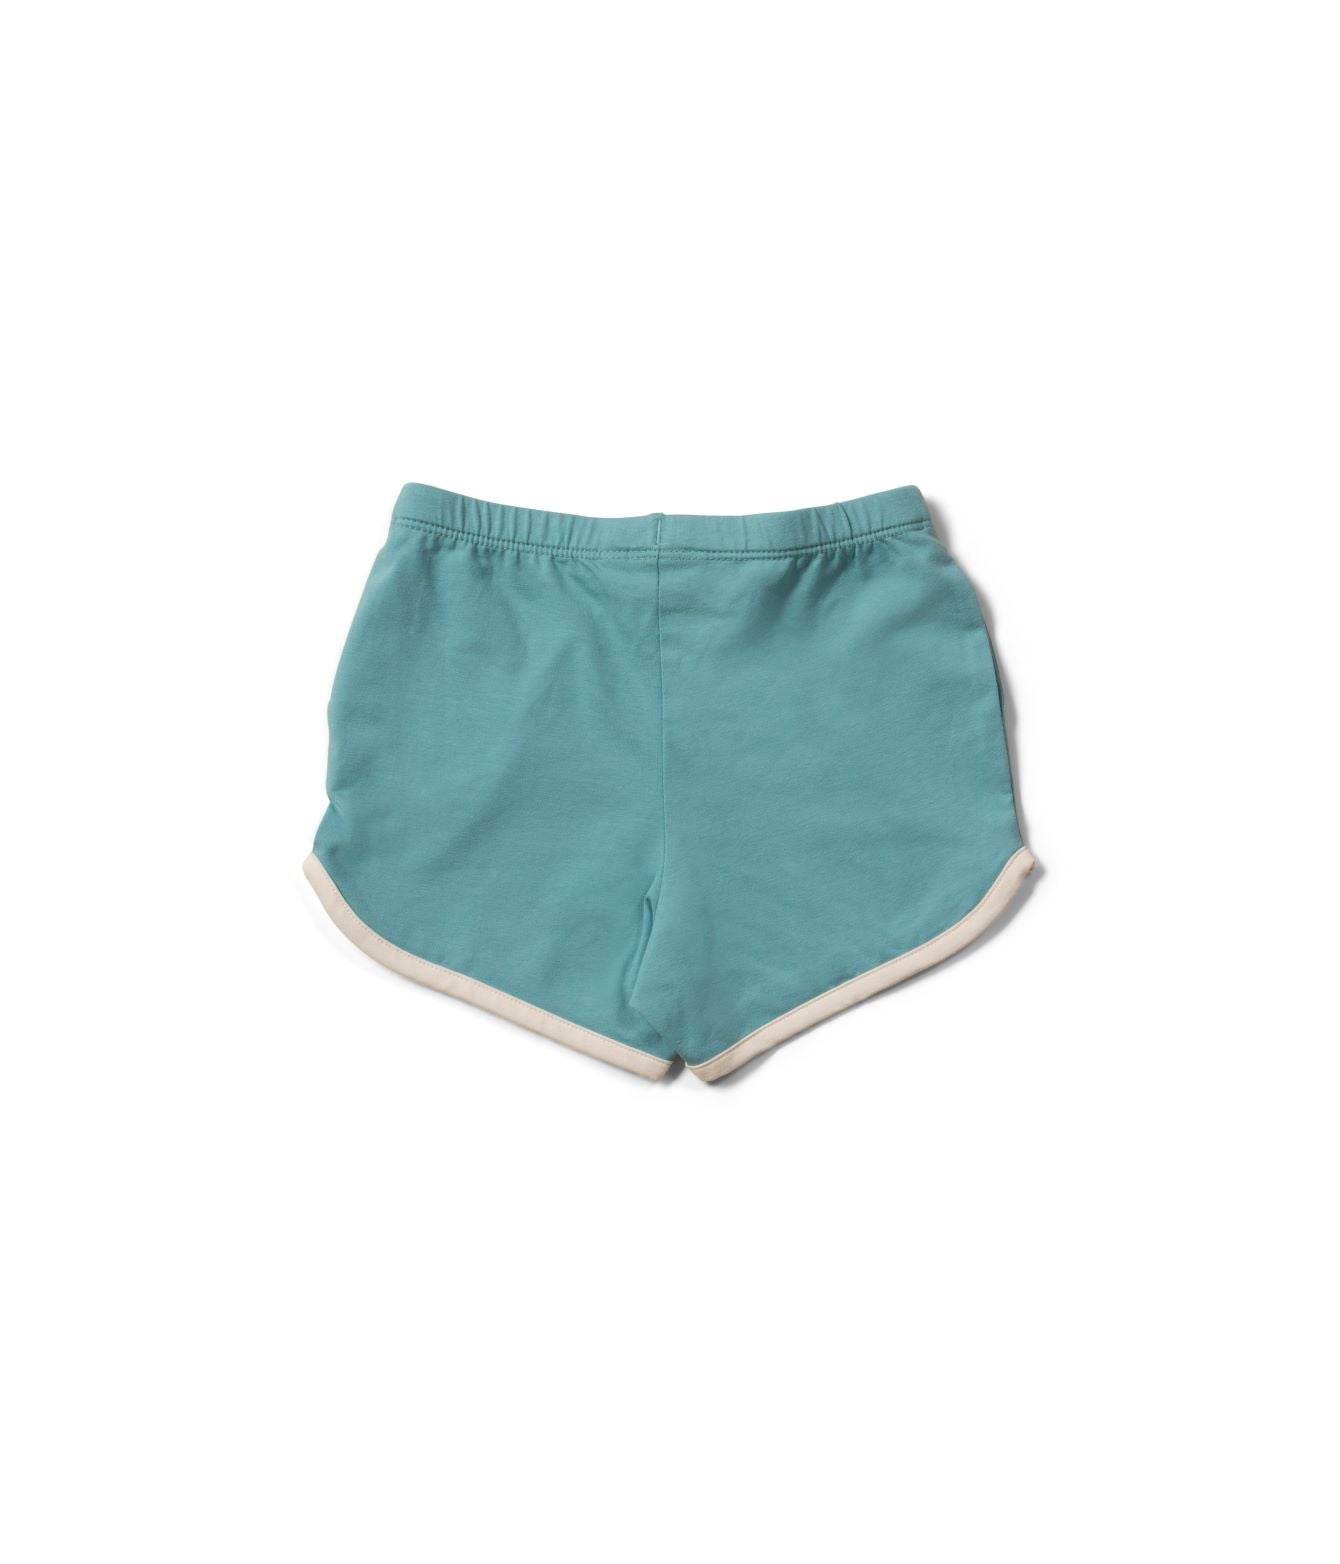 sky blue summer shorts with white trim